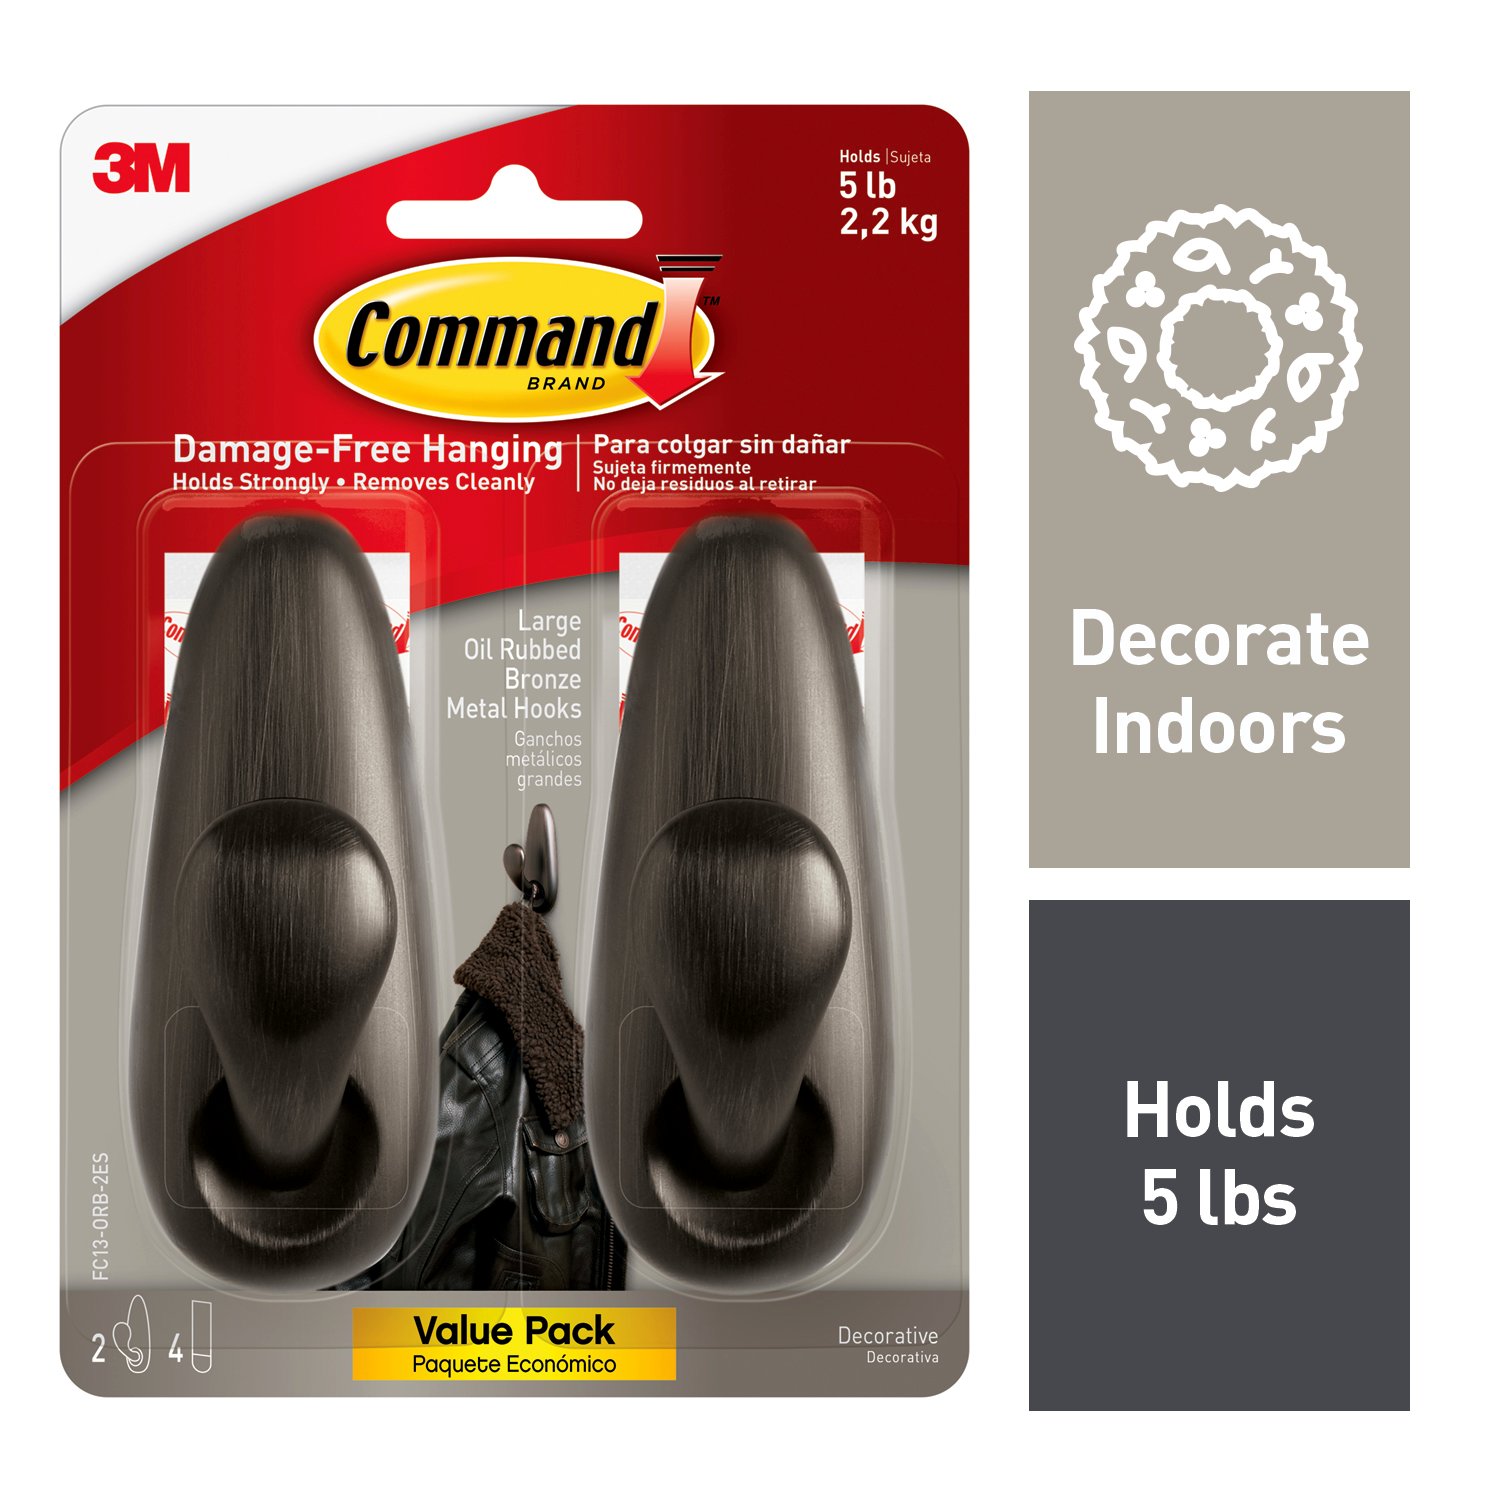 7100085155 - Command Large Forever Classic Oil Rubbed Bronze Metal Hook, FC13-ORB-2ES, 2 Pack